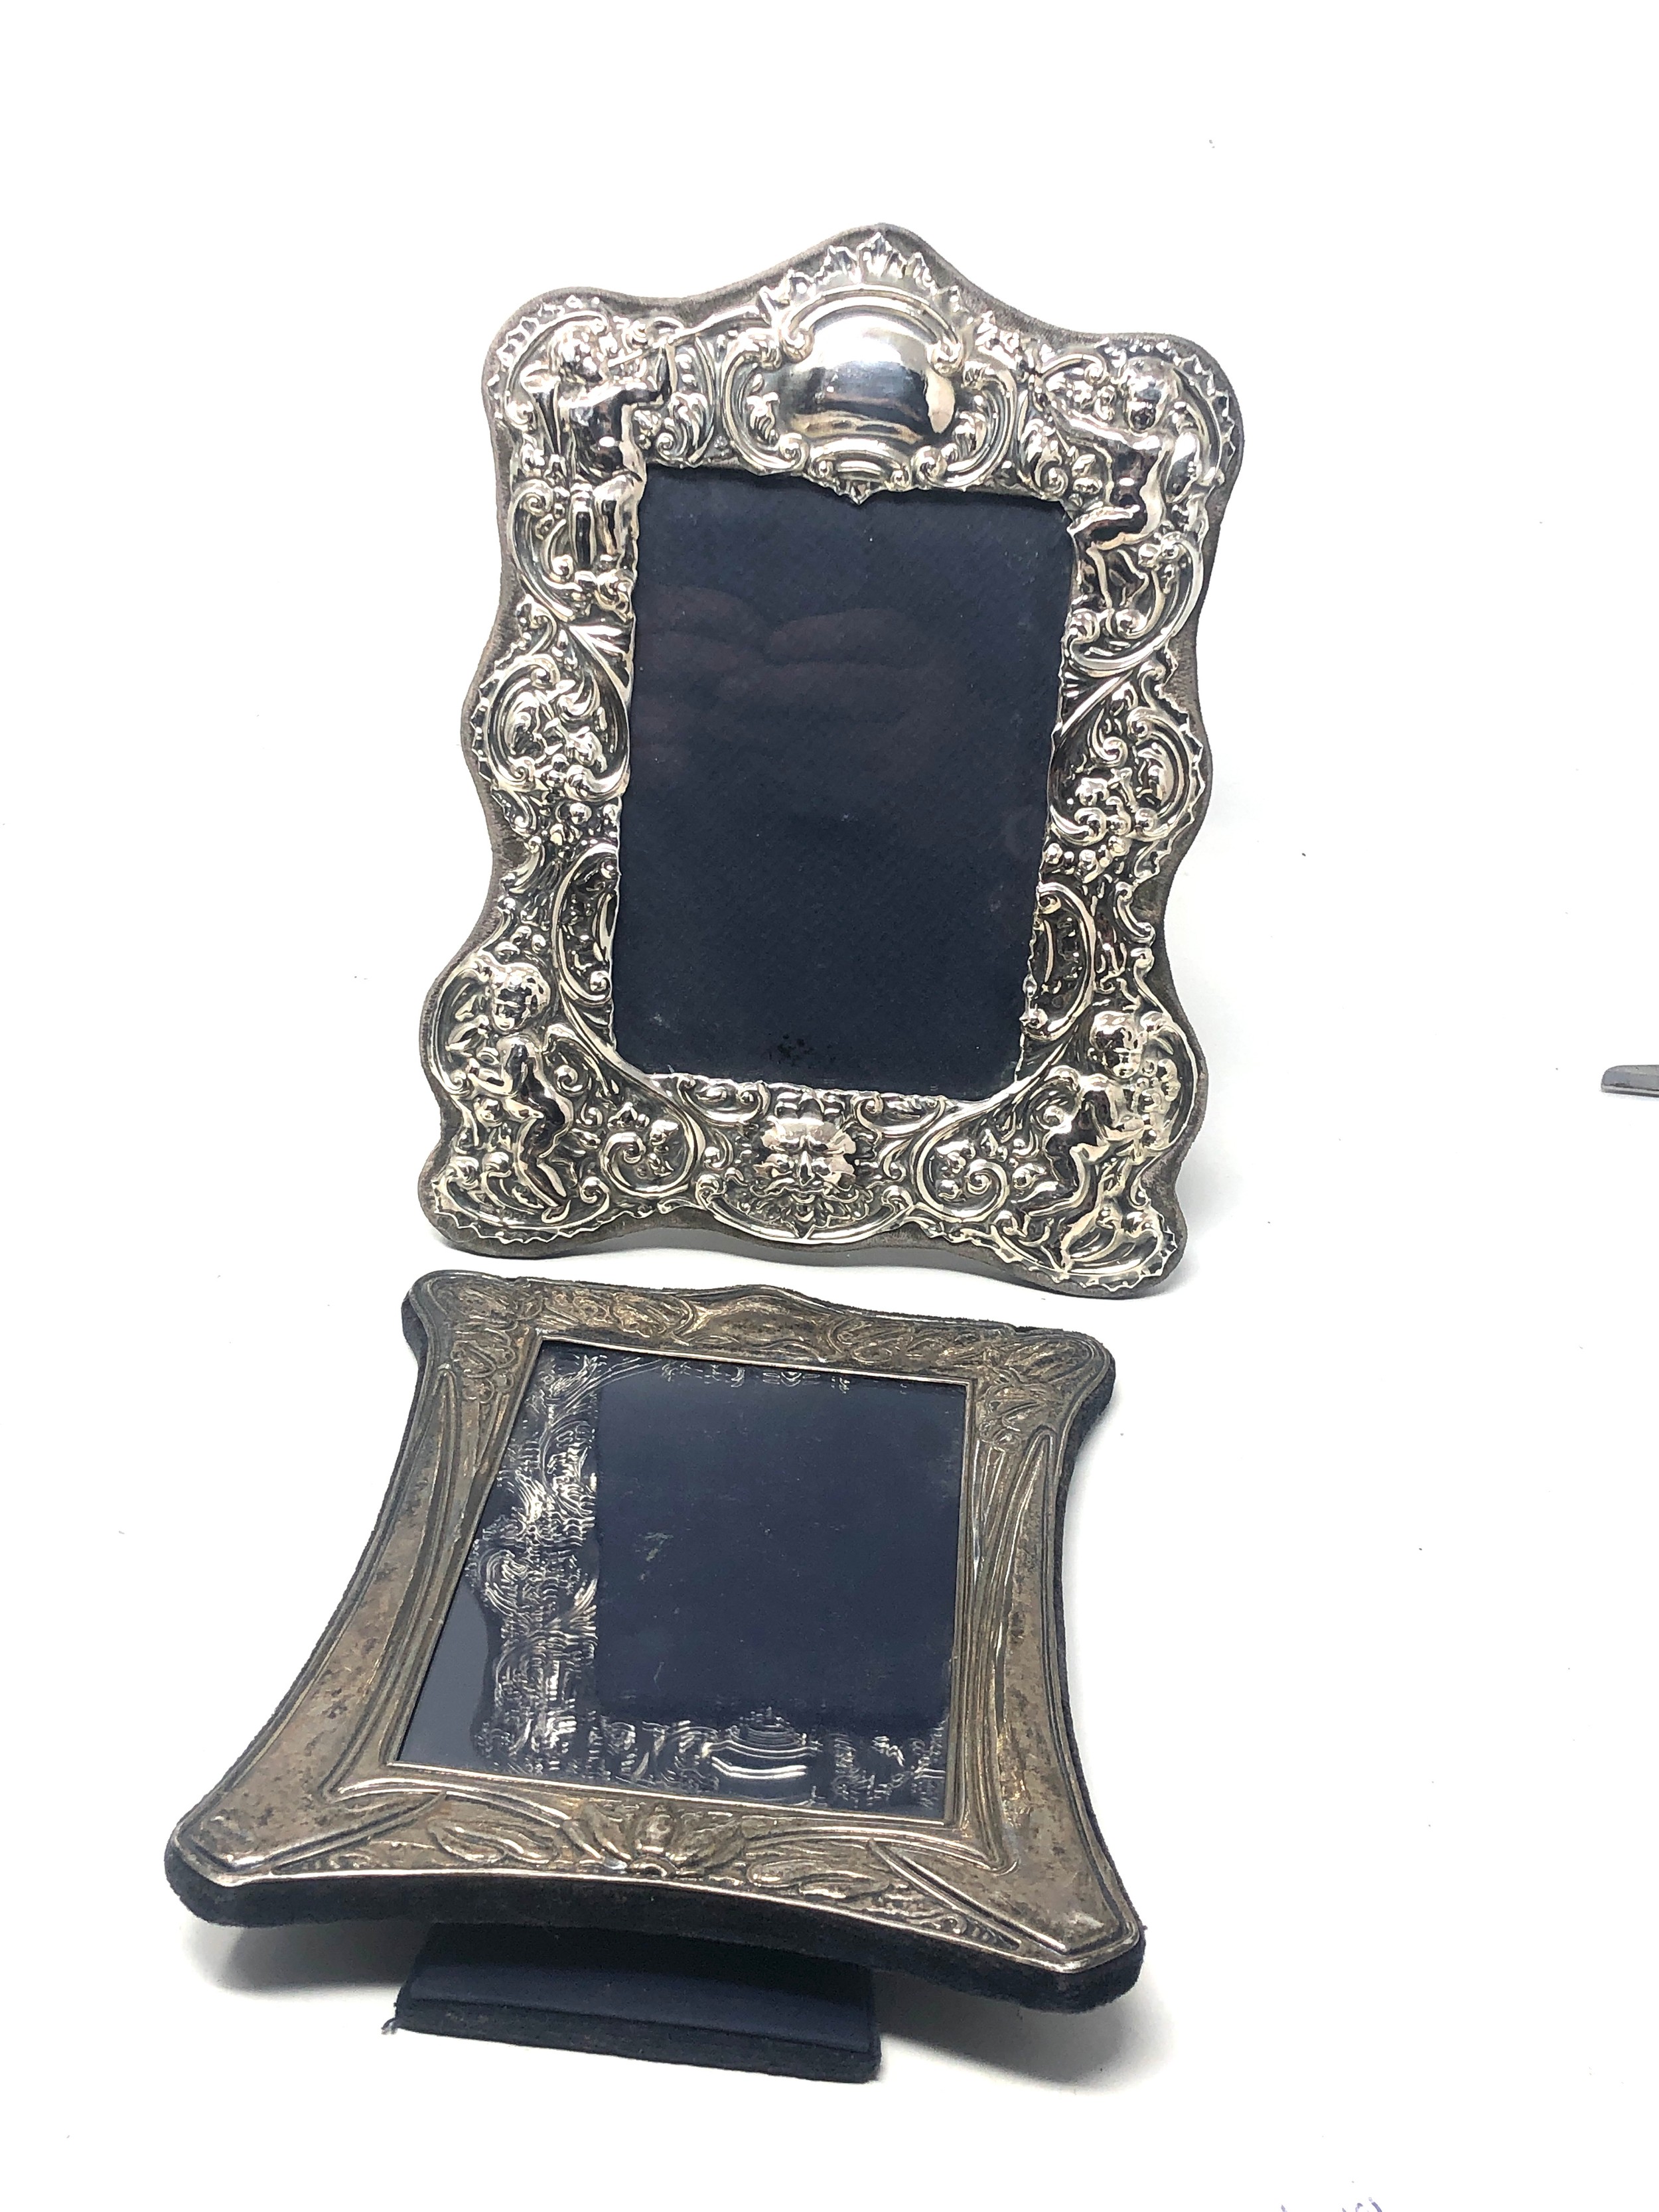 2 vintage silver picture frames largest measures approx 23cm by 18cm - Image 2 of 5